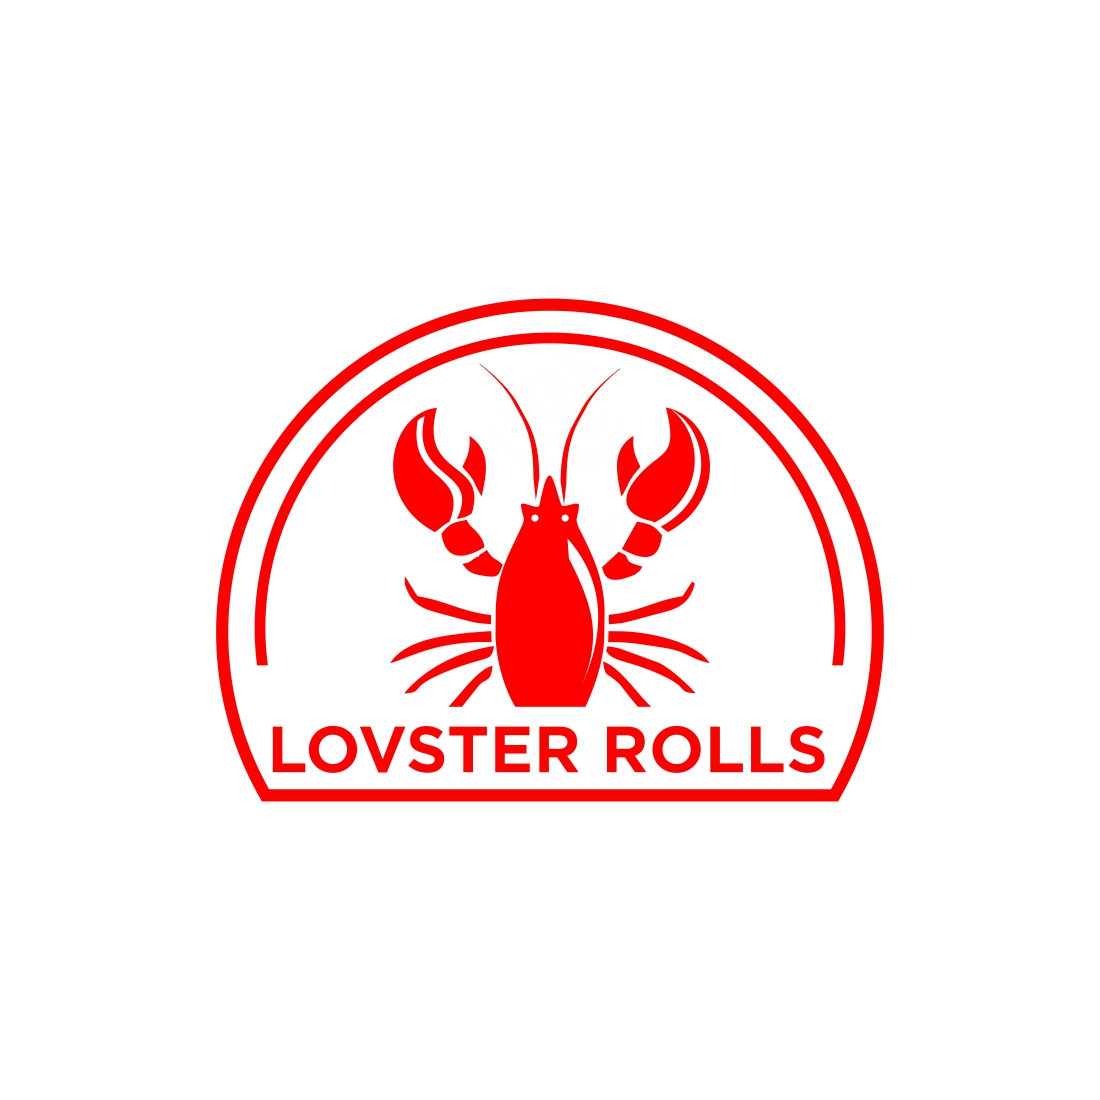 lobster roll logo complete with red lobster illustration cover image.